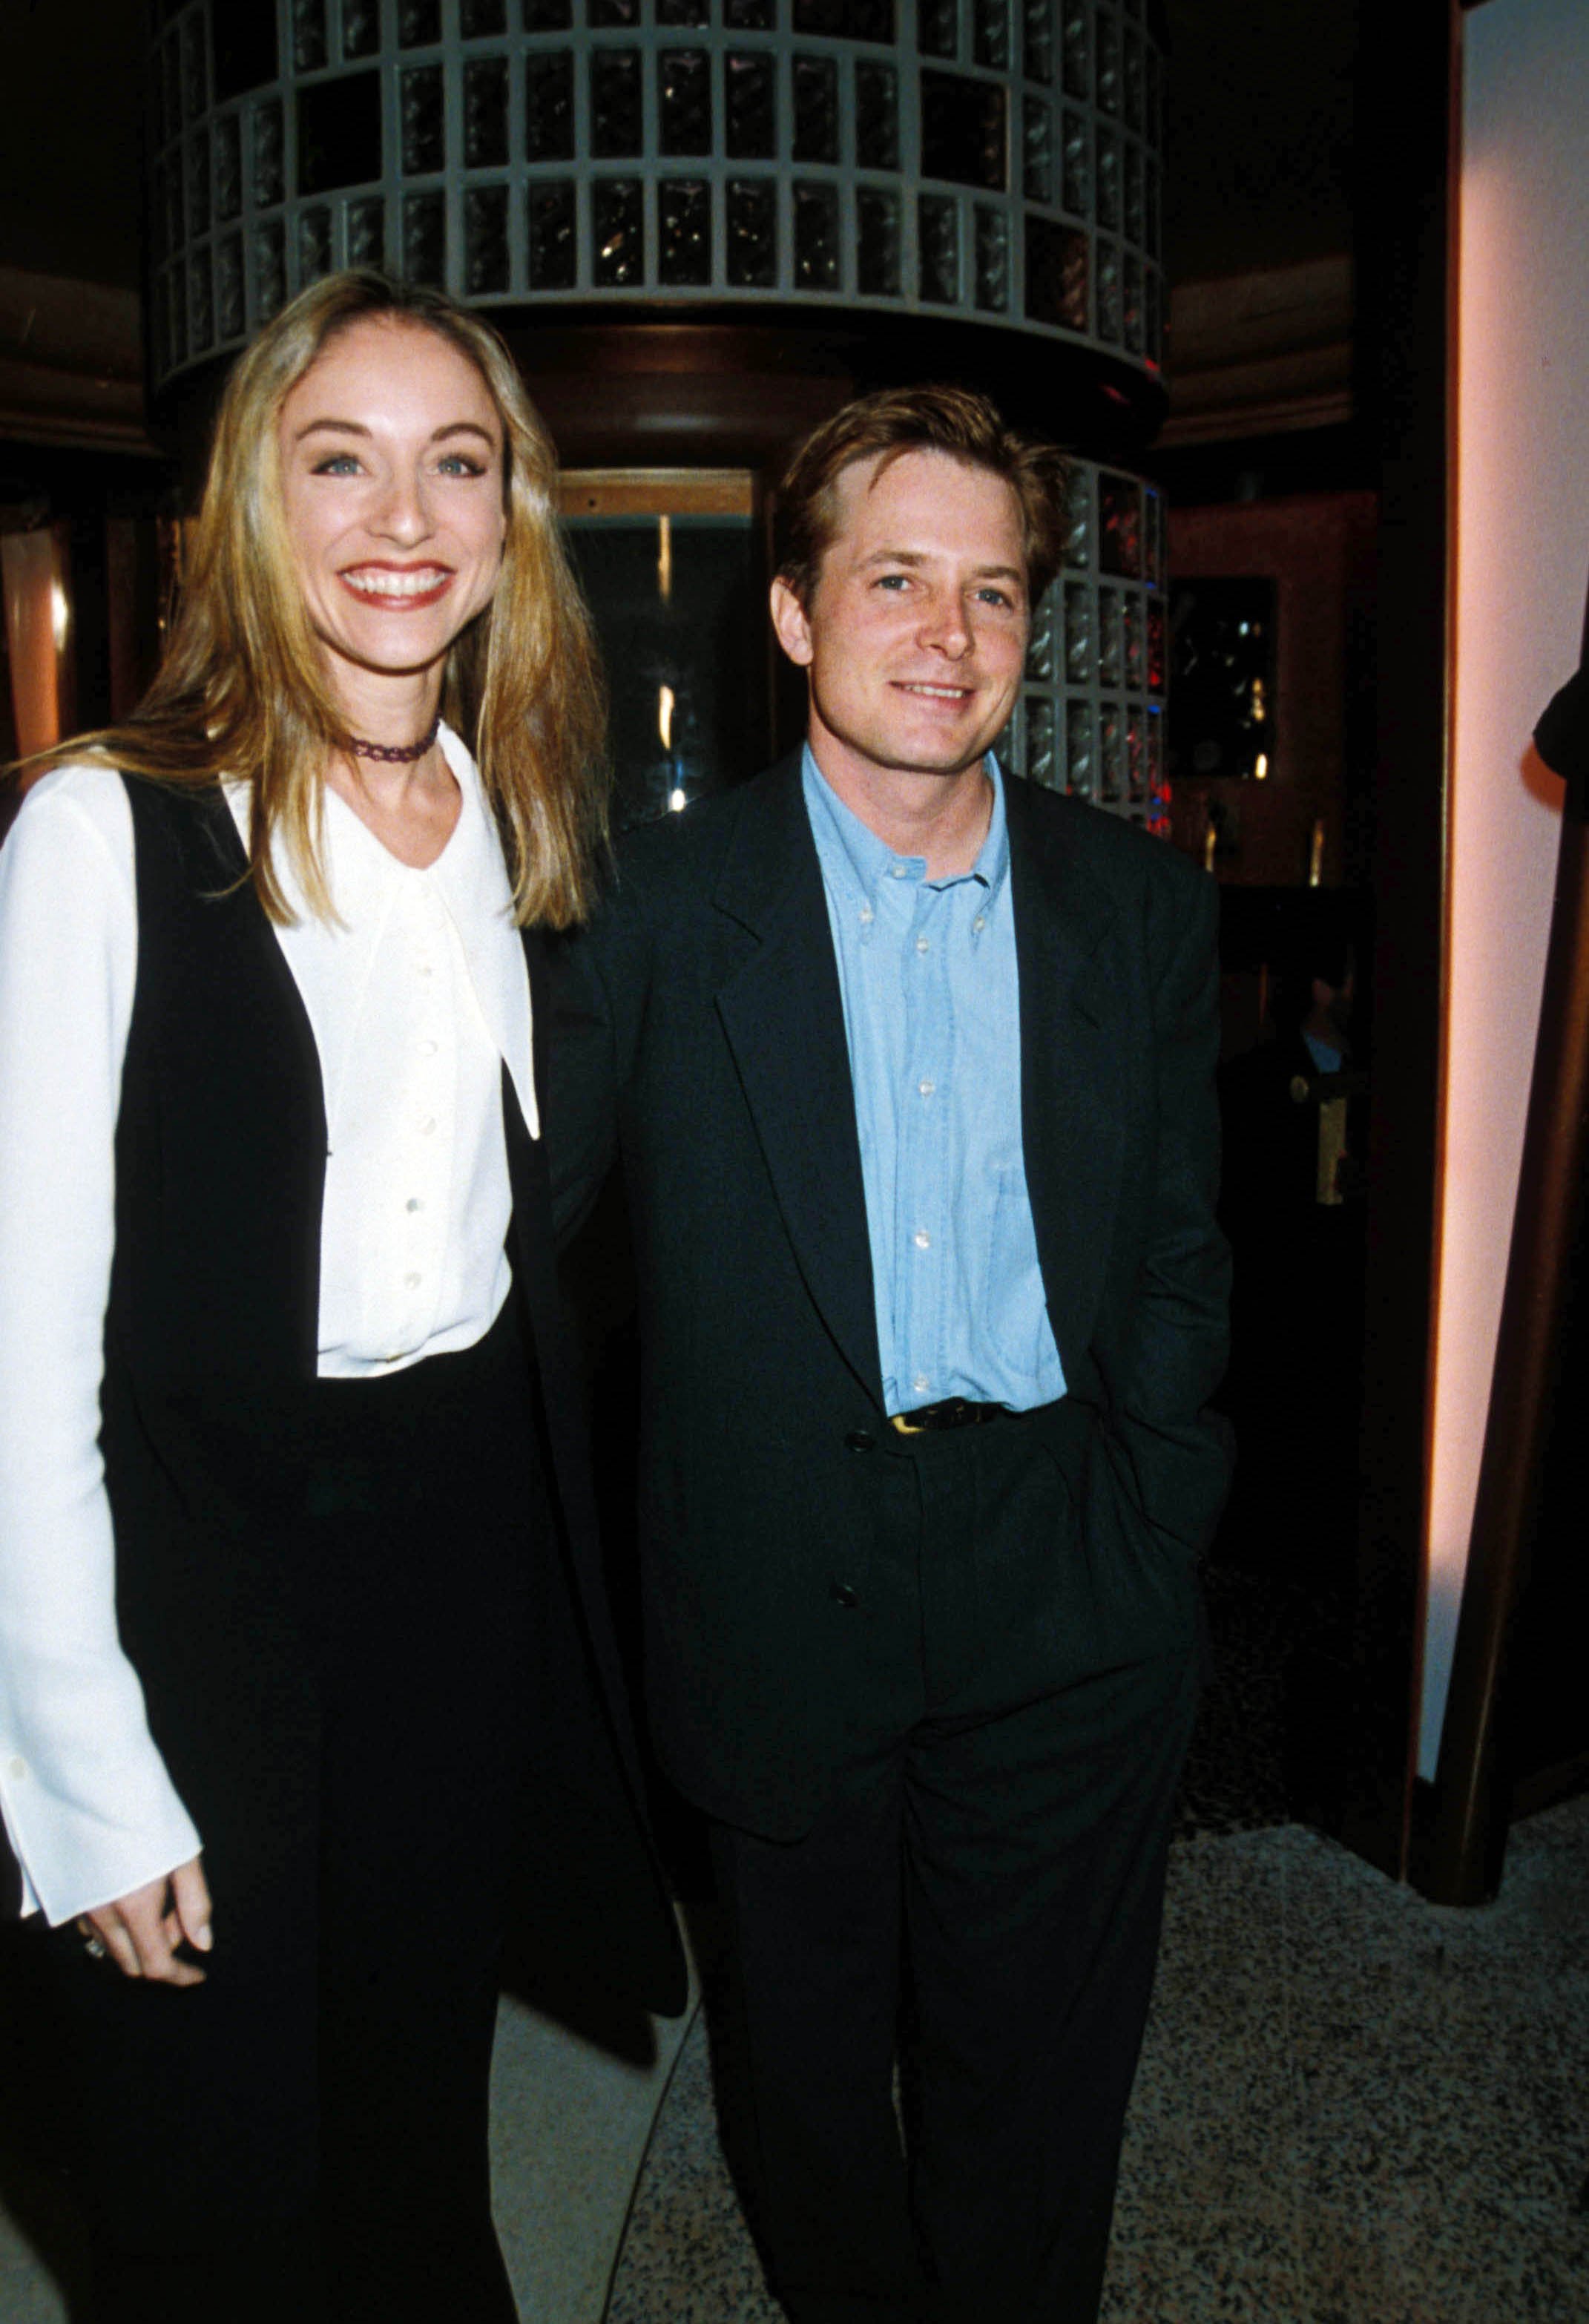 Michael J Fox With Wife Tracy Pollan At Planet Hollywood In London, circa 1991. | Source: Getty Images